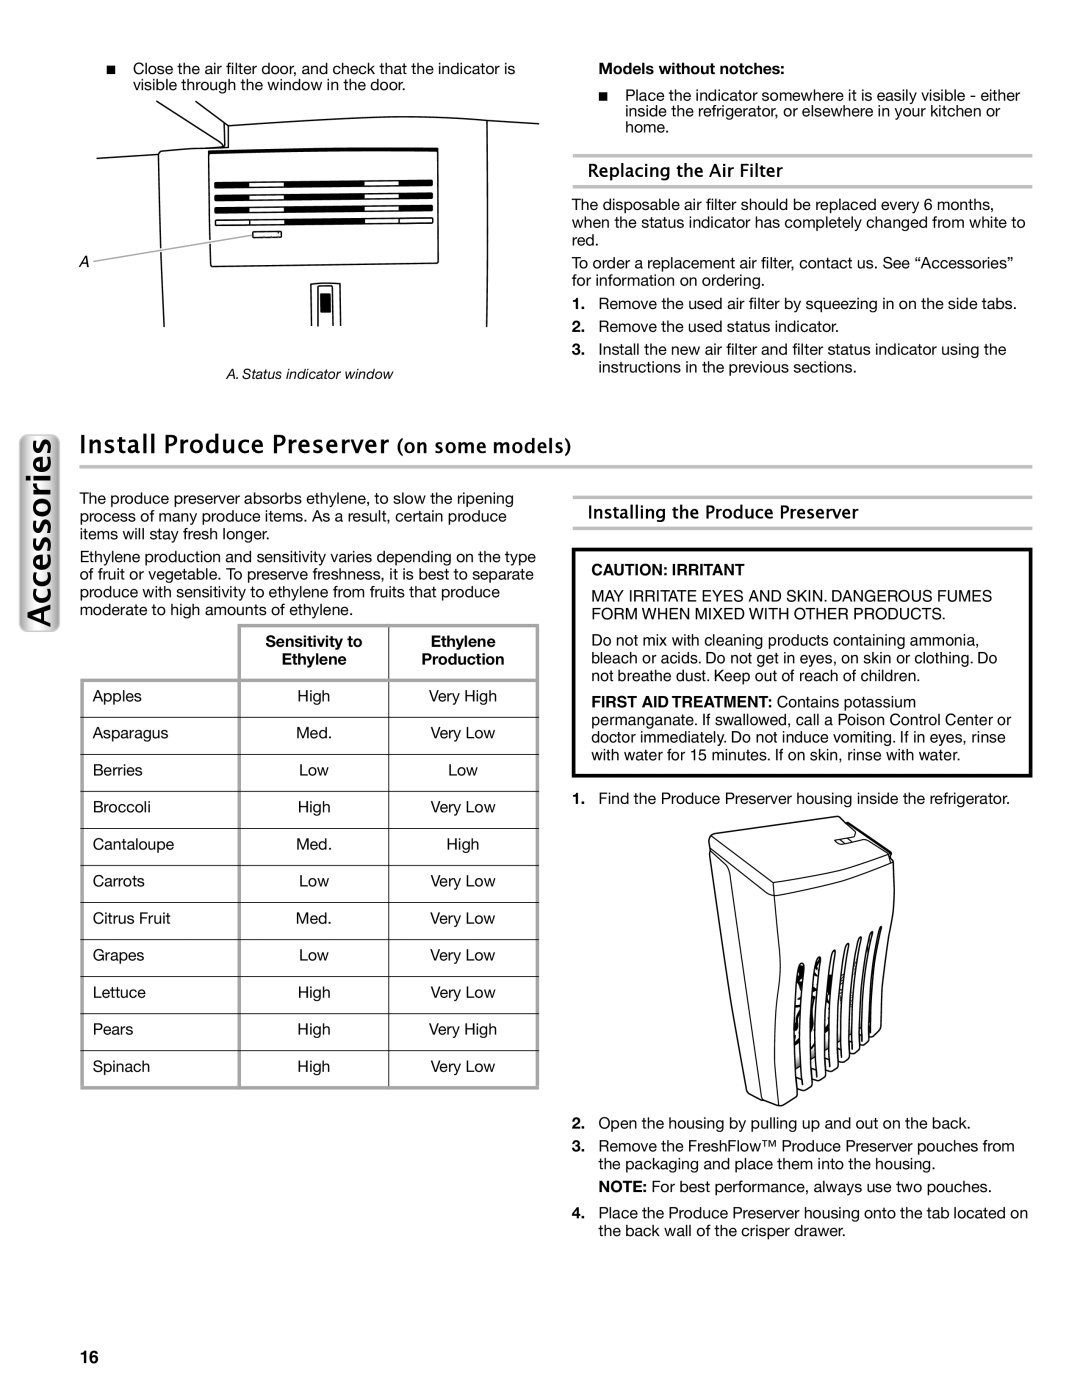 Maytag W10558104A Accessories, Install Produce Preserver on some models, Replacing the Air Filter, Models without notches 